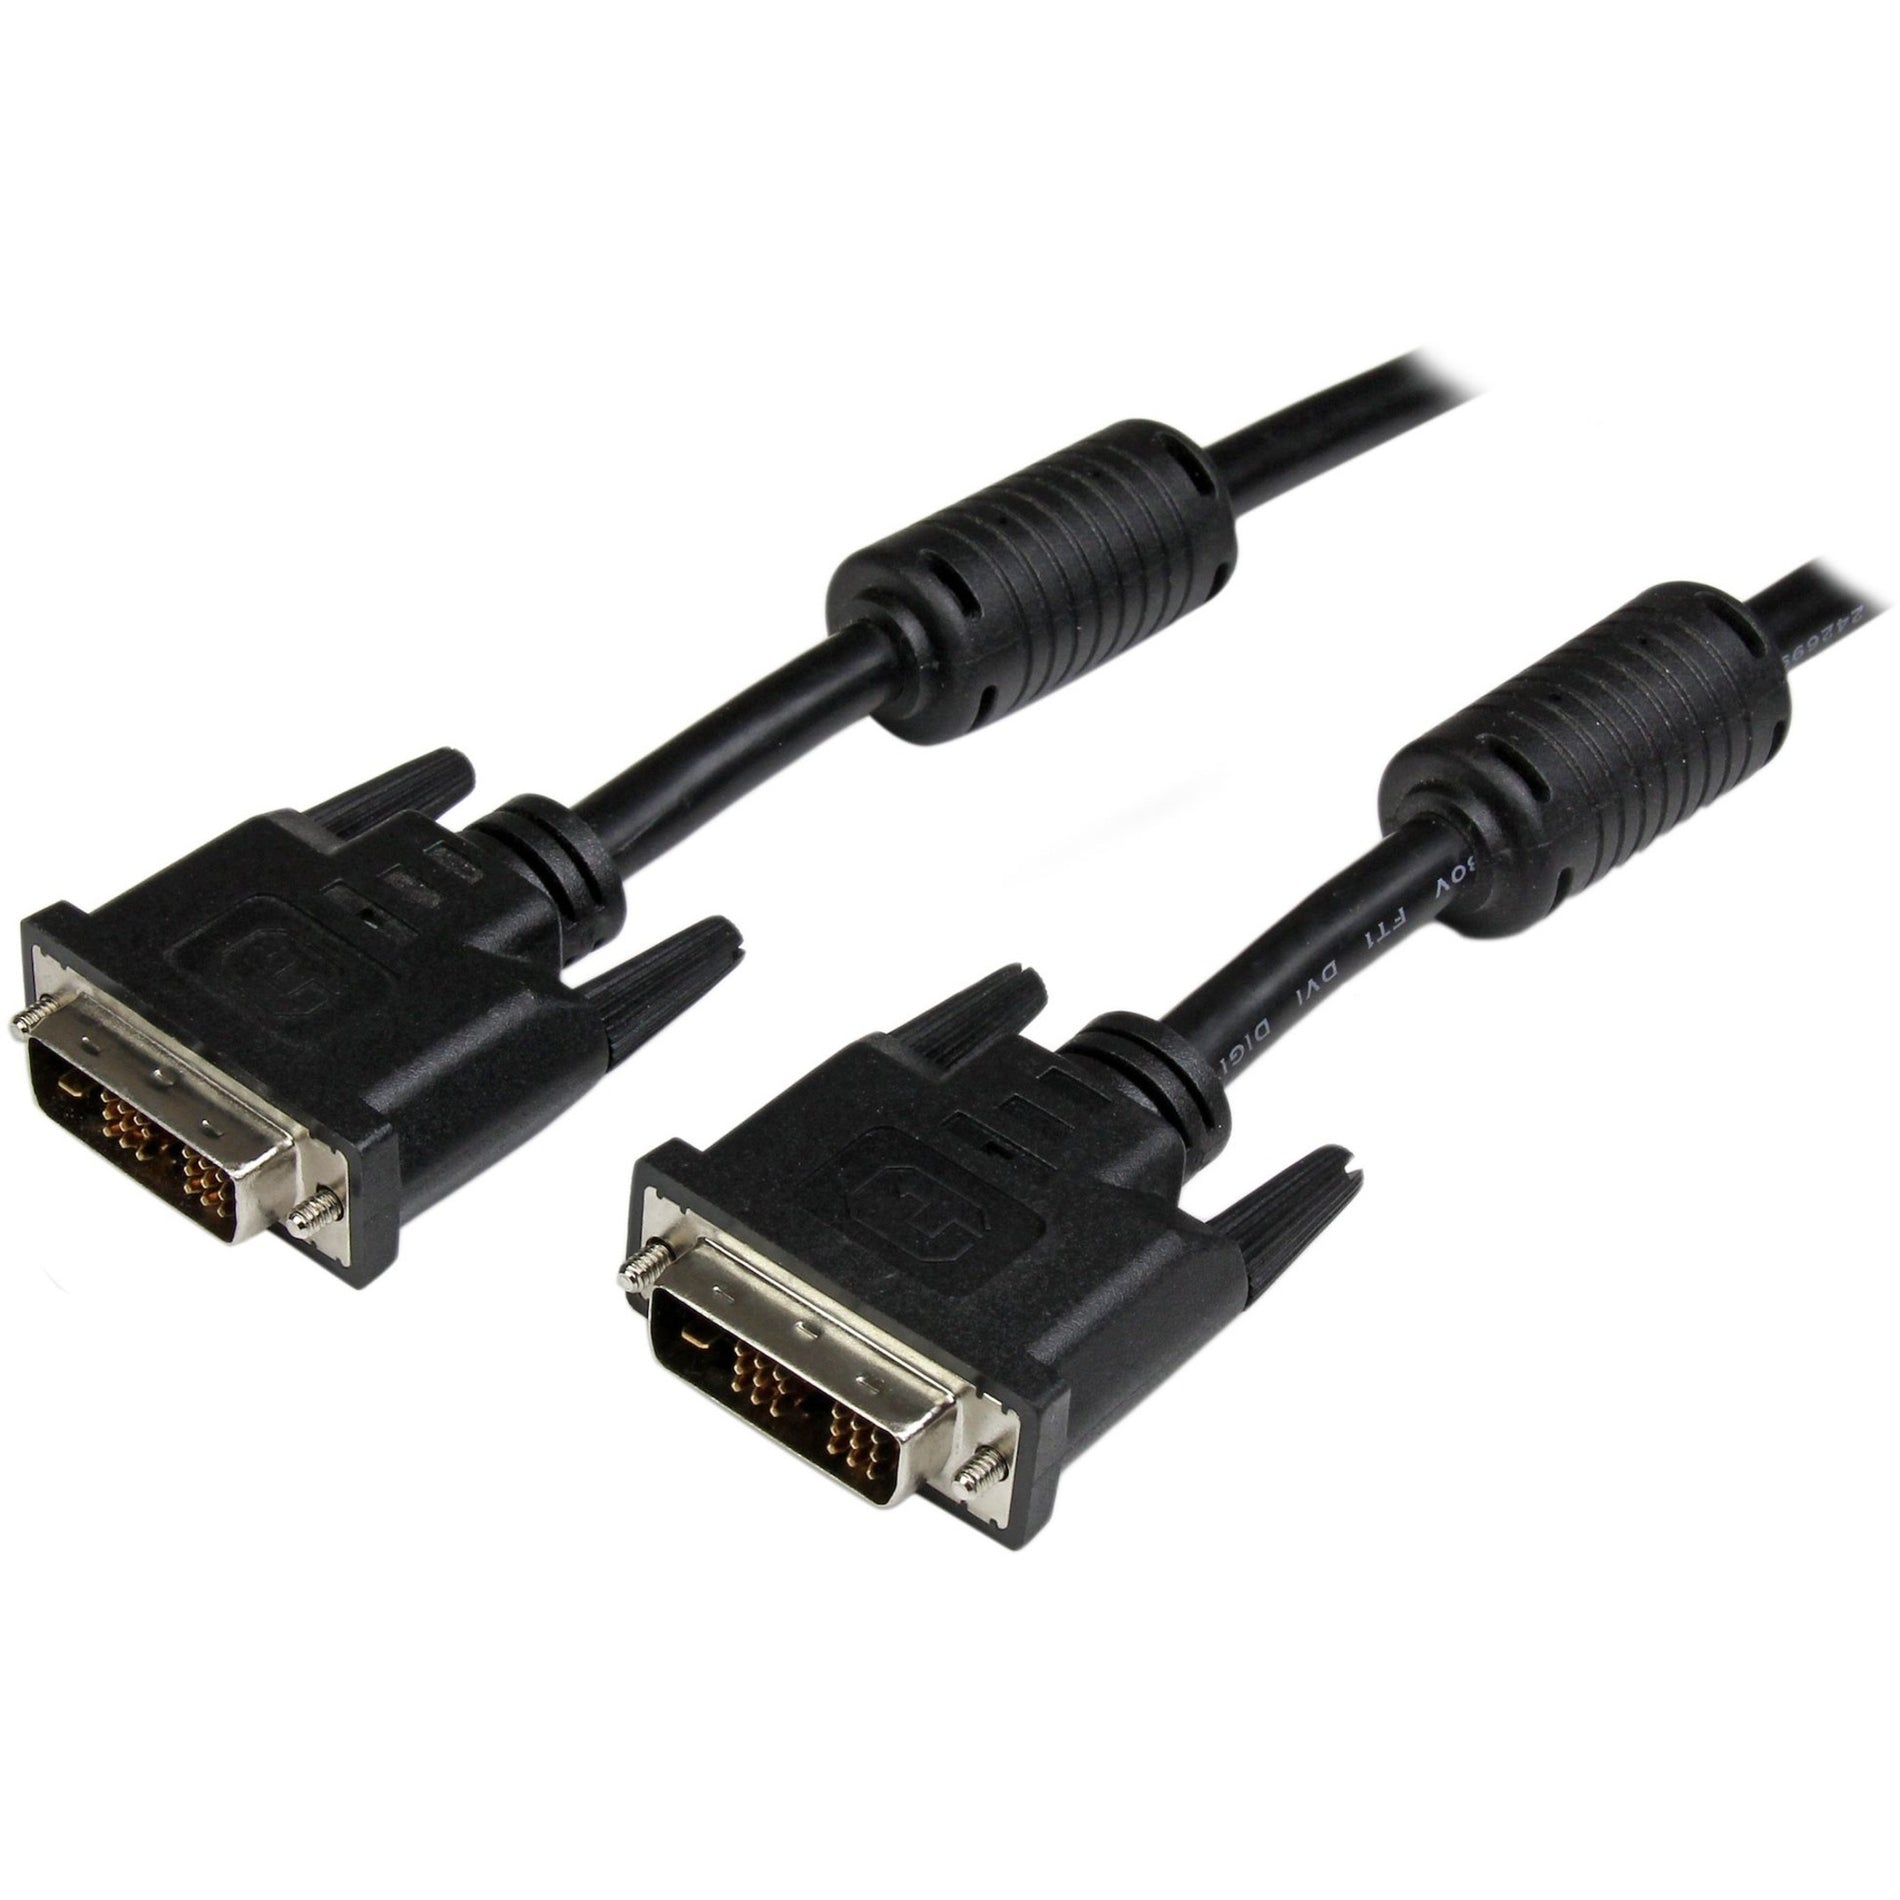 StarTech.com DVIDSMM15 15ft DVI-D Single Link Cable - M/M, High-Speed Digital Video Cable for Monitors, Projectors, HDTVs